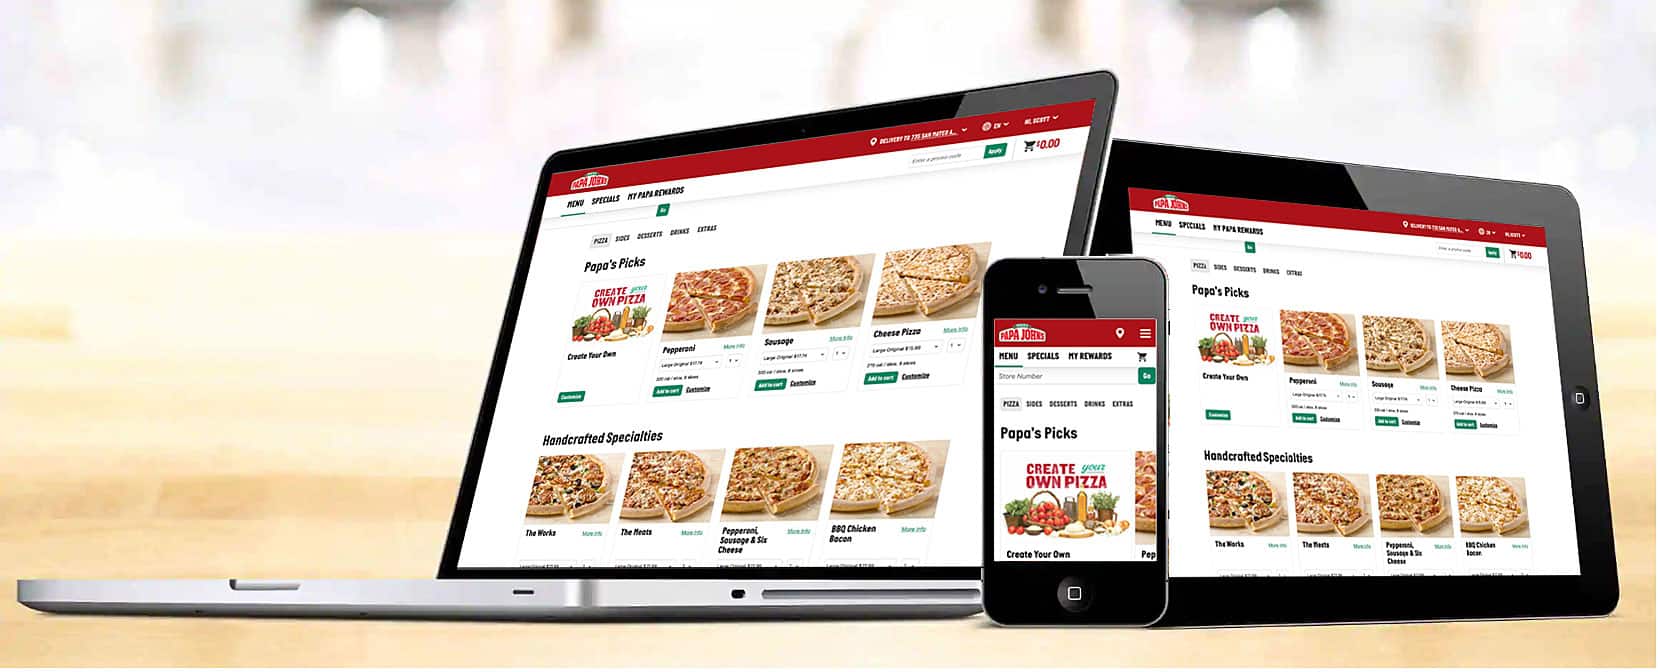 Papa John's Pizza - Our Updated menu.